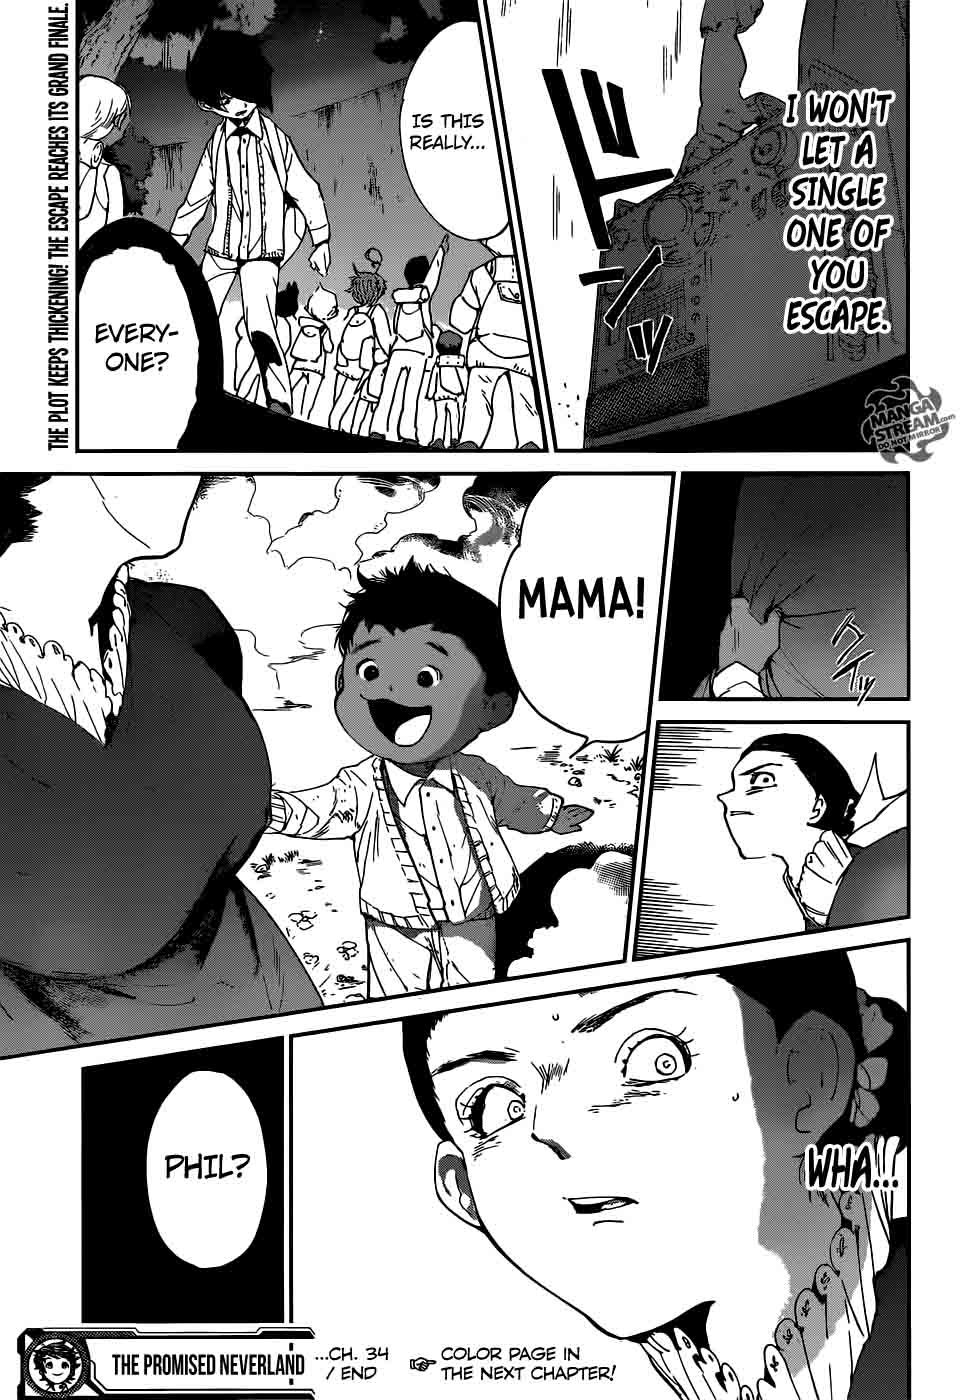 the_promised_neverland_34_20